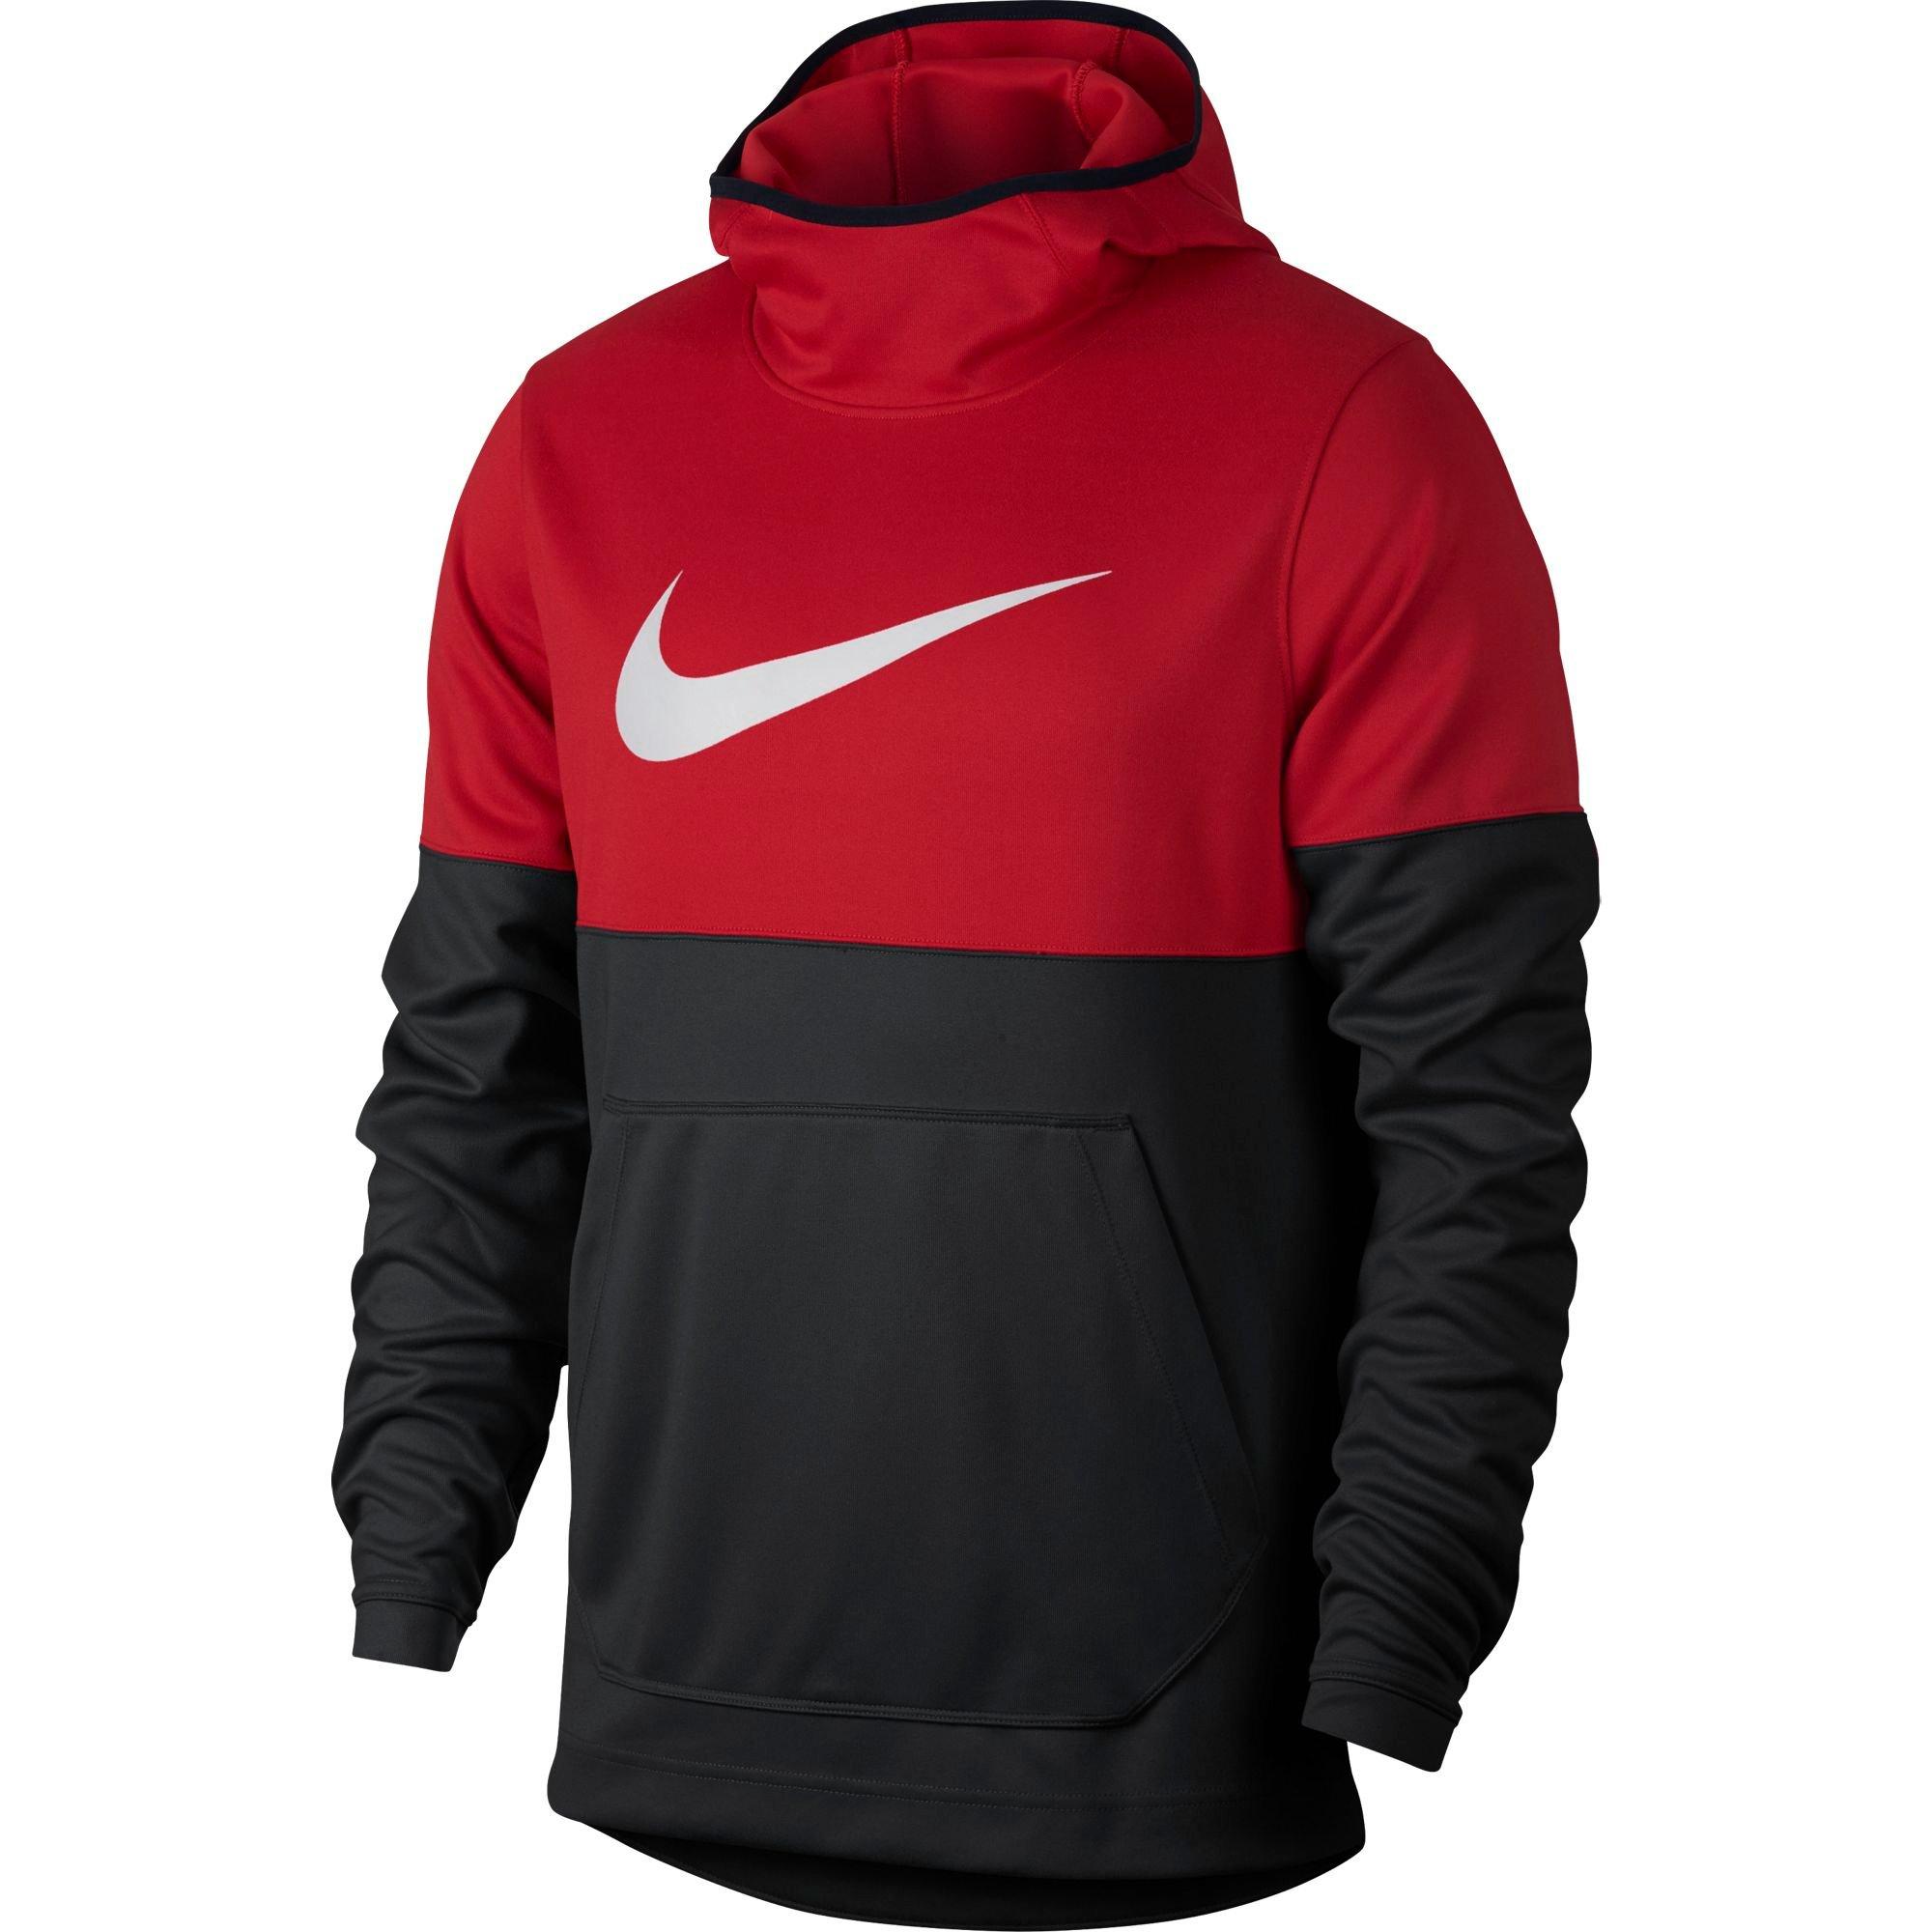 red and black nike sweater